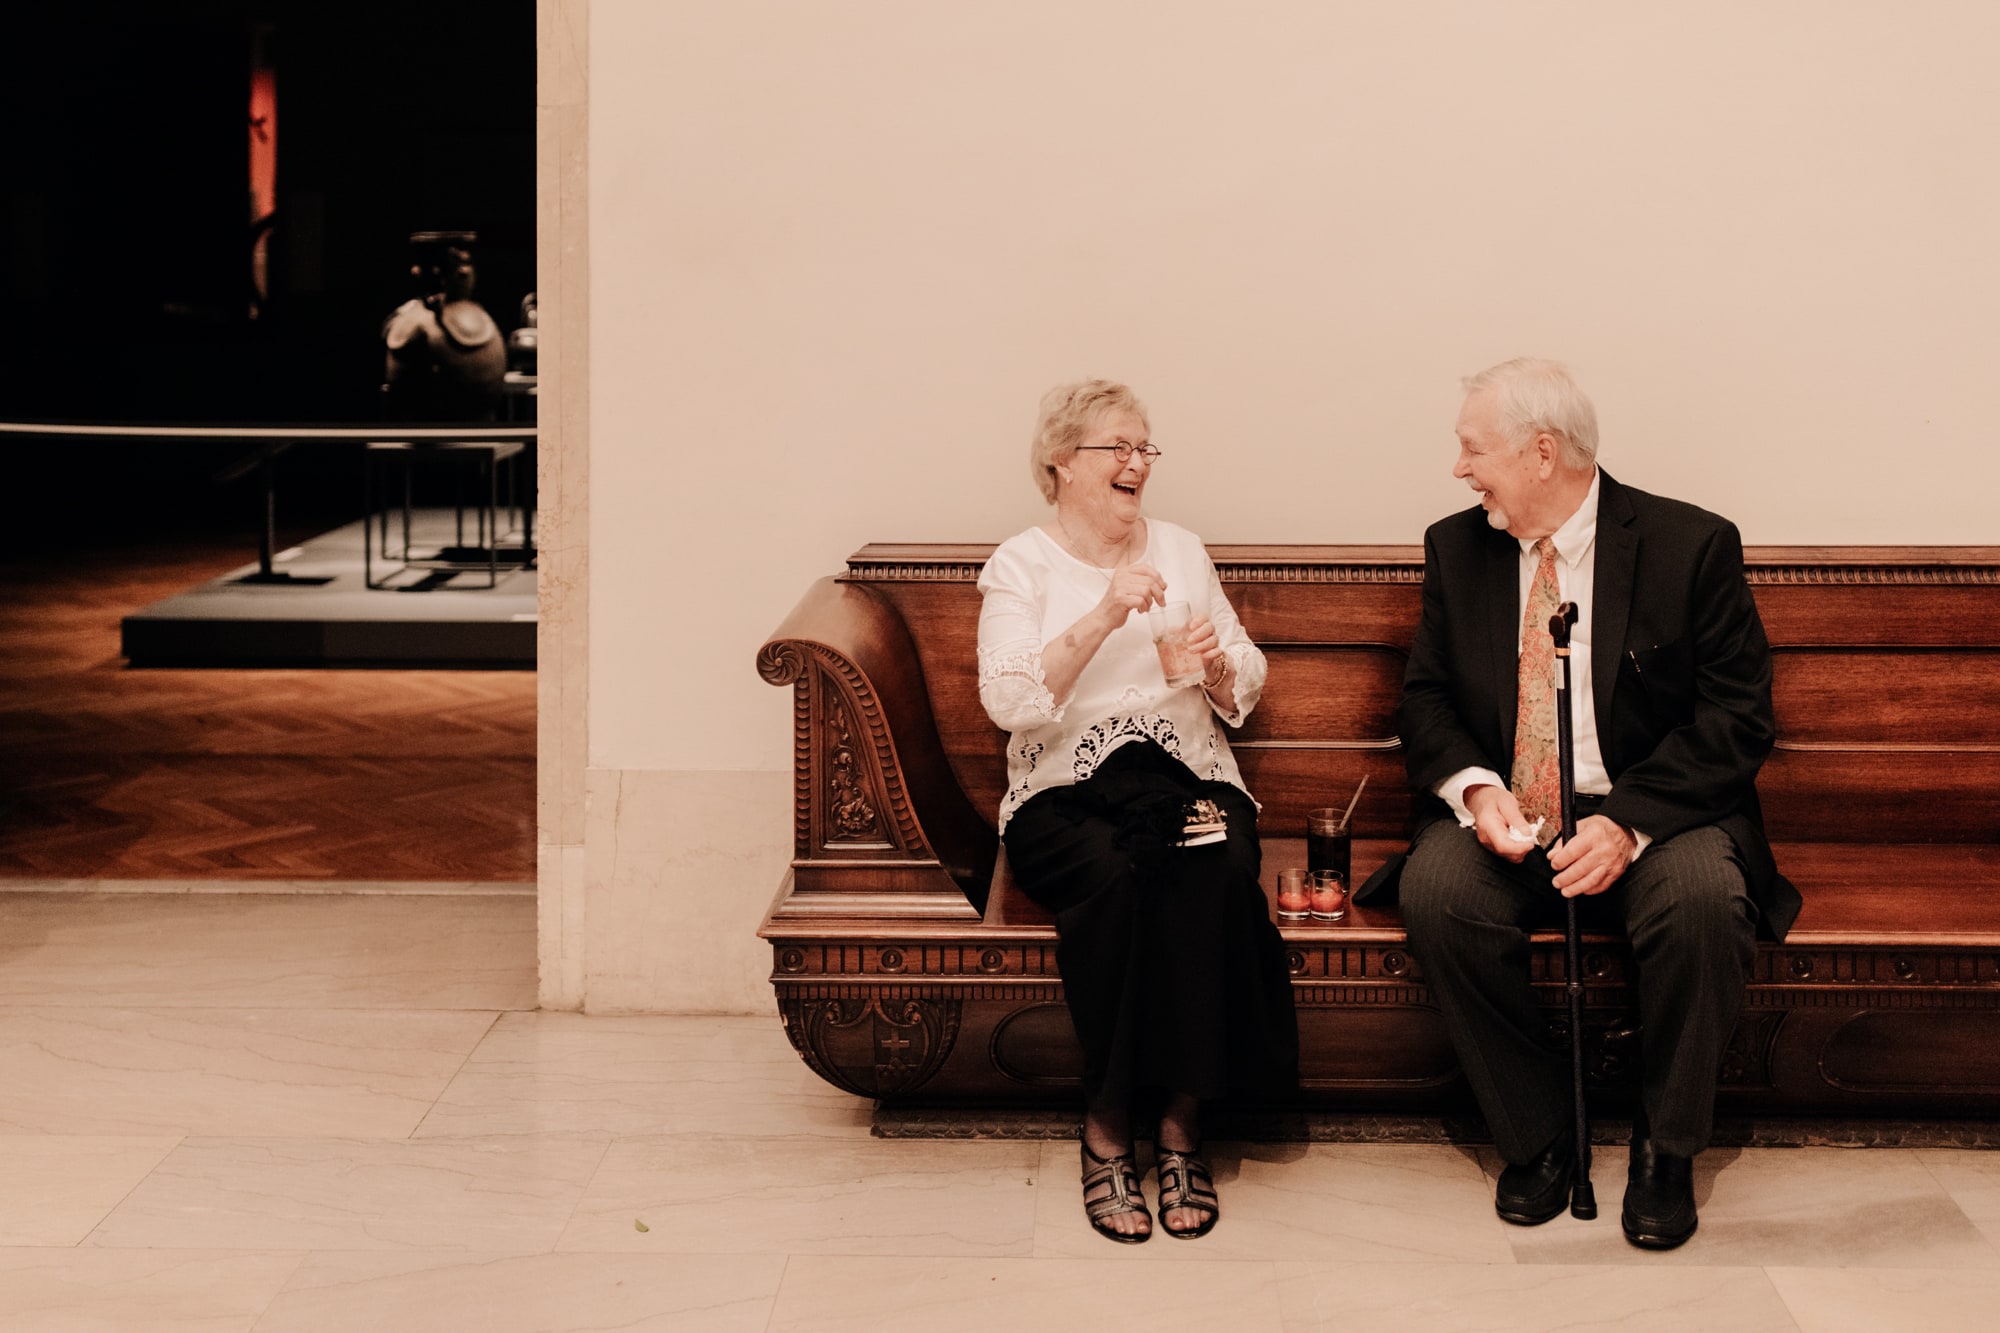 A senior couple laugh together while sitting on a wood bench during a wedding at the Minneapolis Institute of Art.